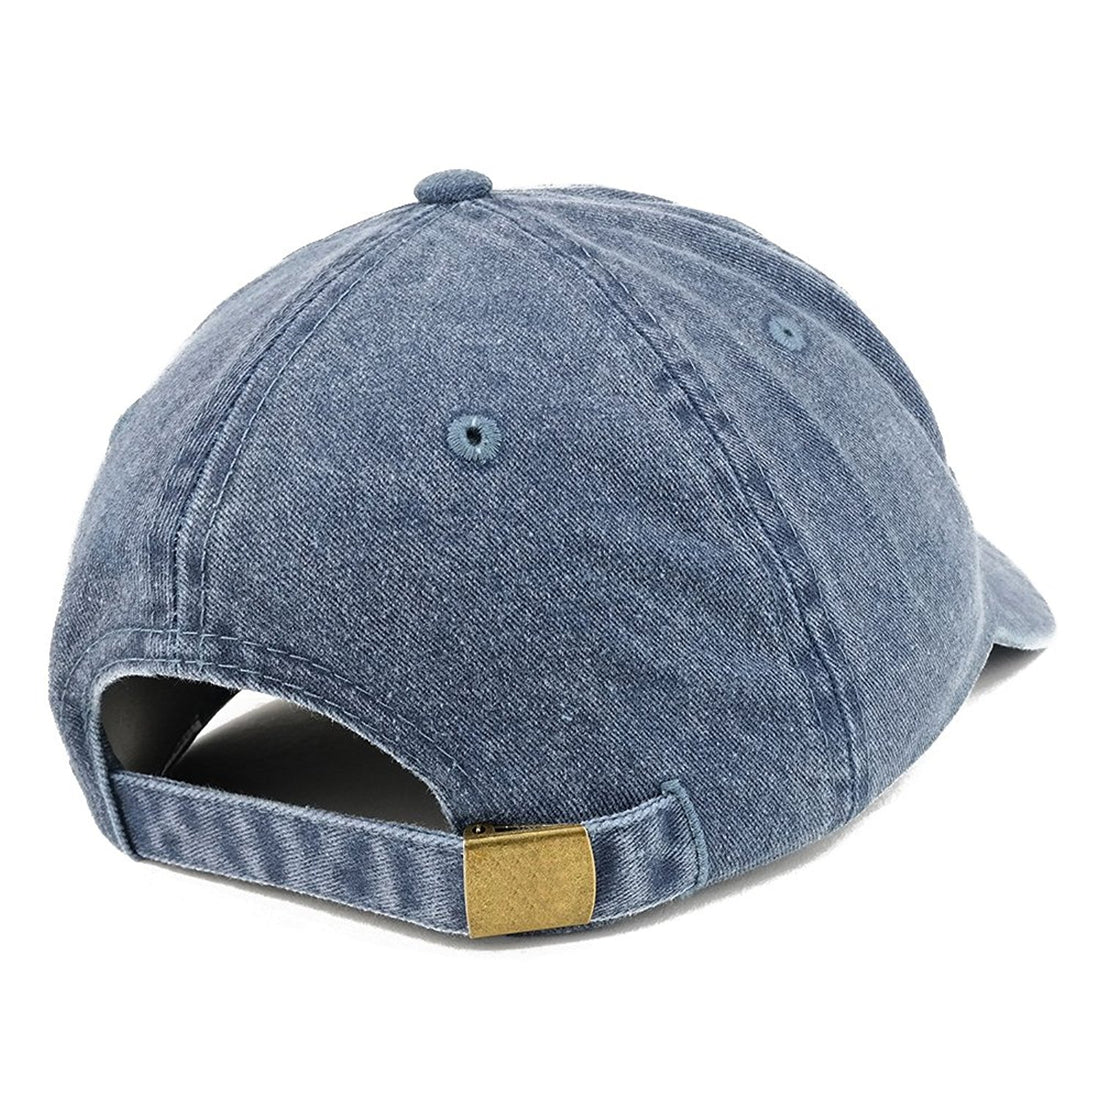 Trendy Apparel Shop Established 1965 Embroidered 54th Birthday Gift Pigment Dyed Washed Cotton Cap